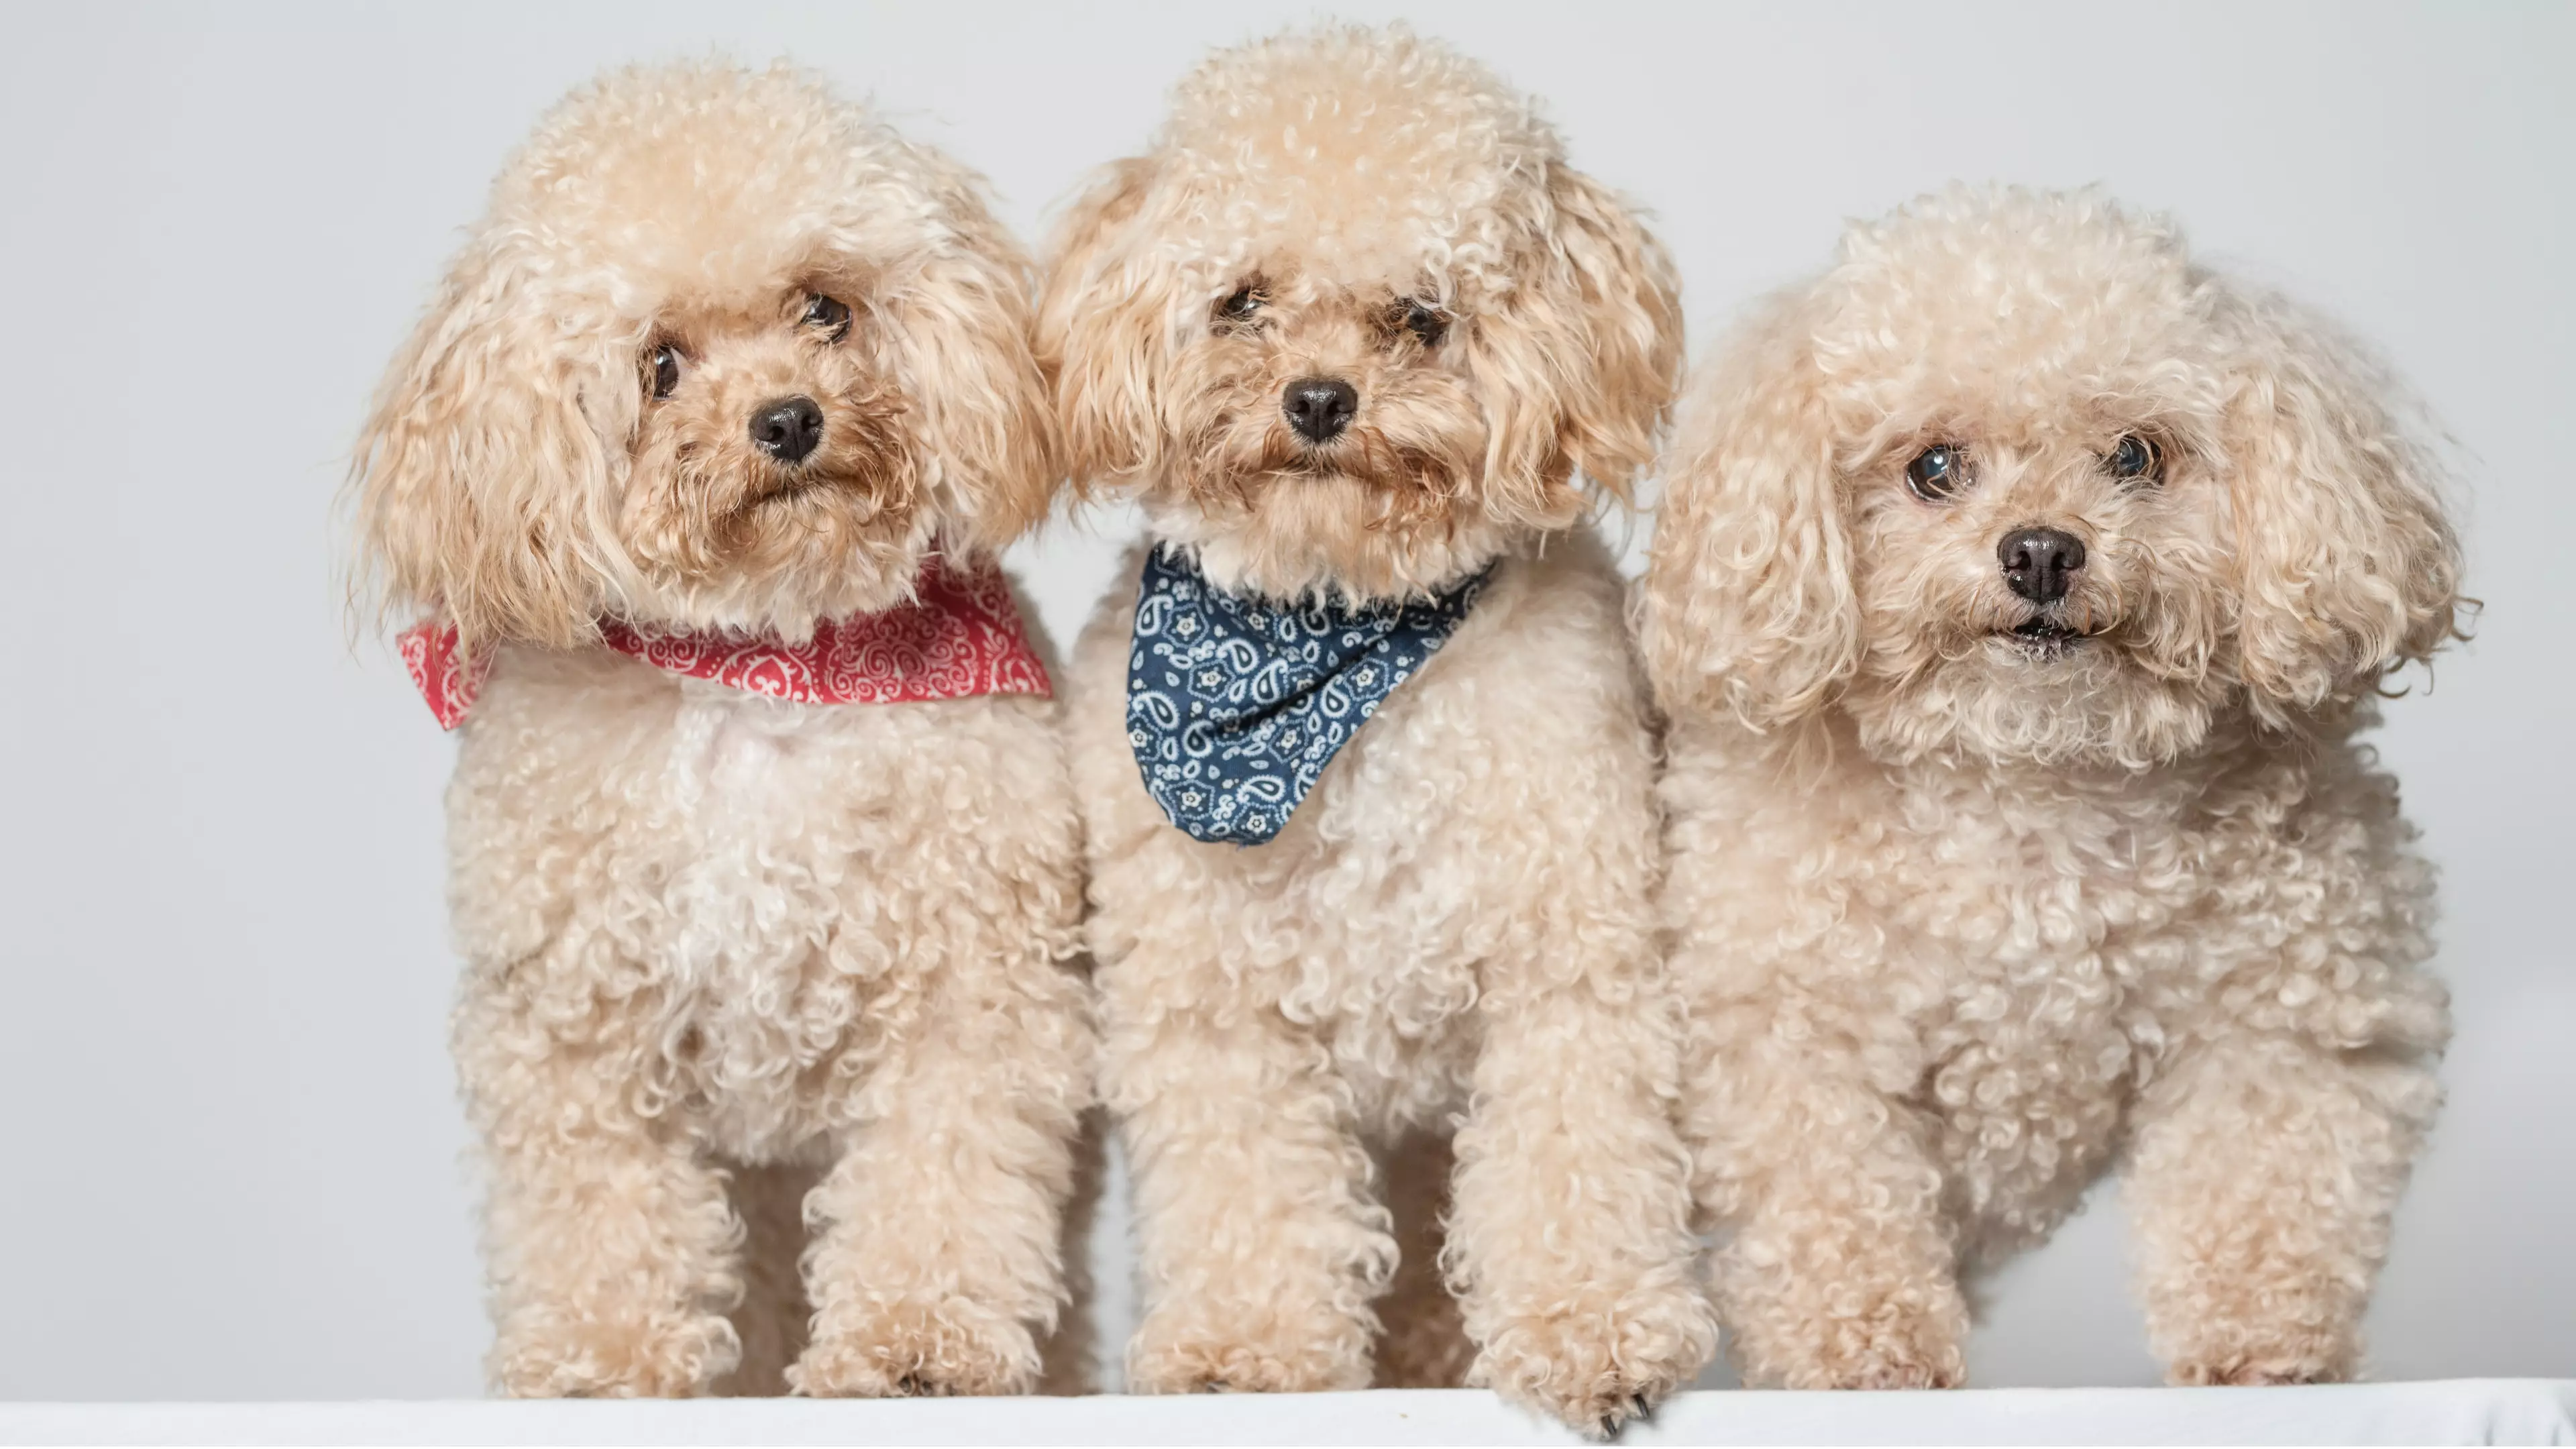 Woman Who Spent $50,000 Cloning Her Dog Says She Will Do It Again 